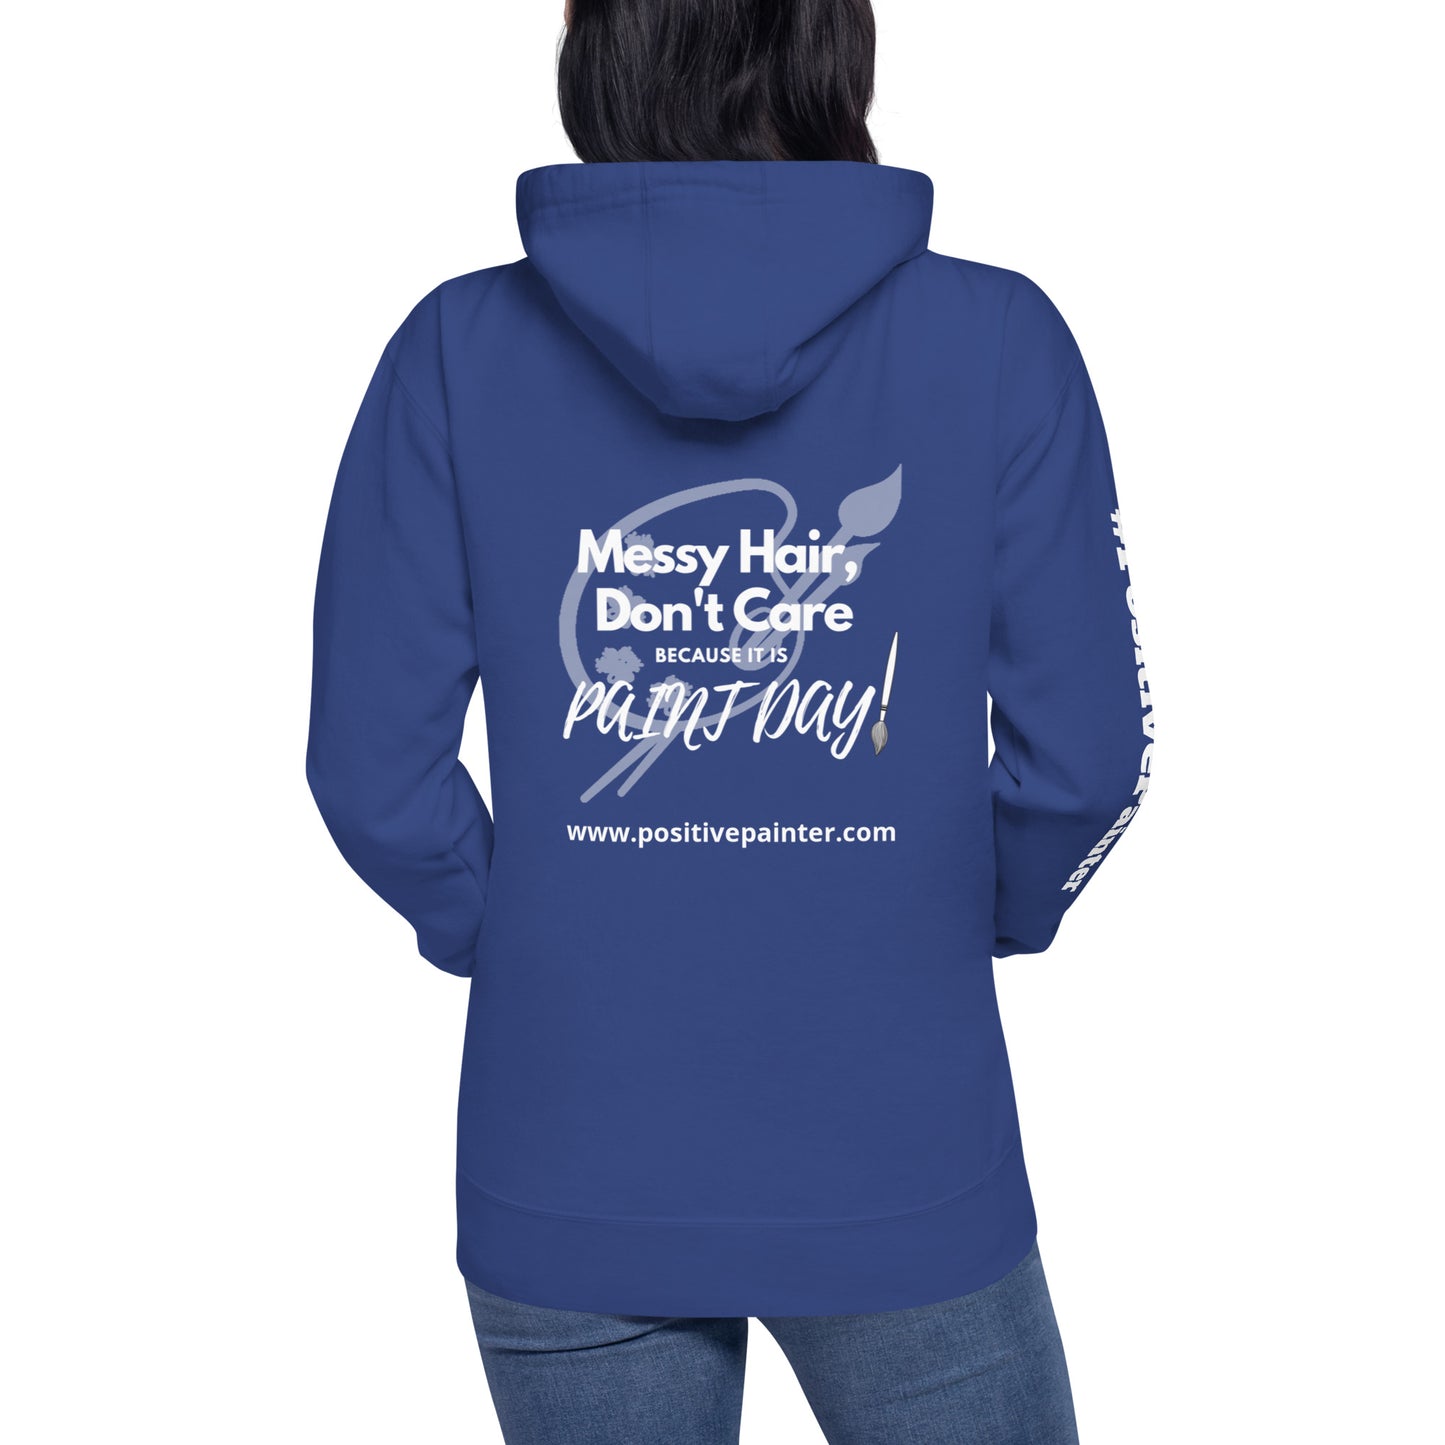 "Messy Hair Don't Care Because It's Paint Day" Unisex Artist Hoodie